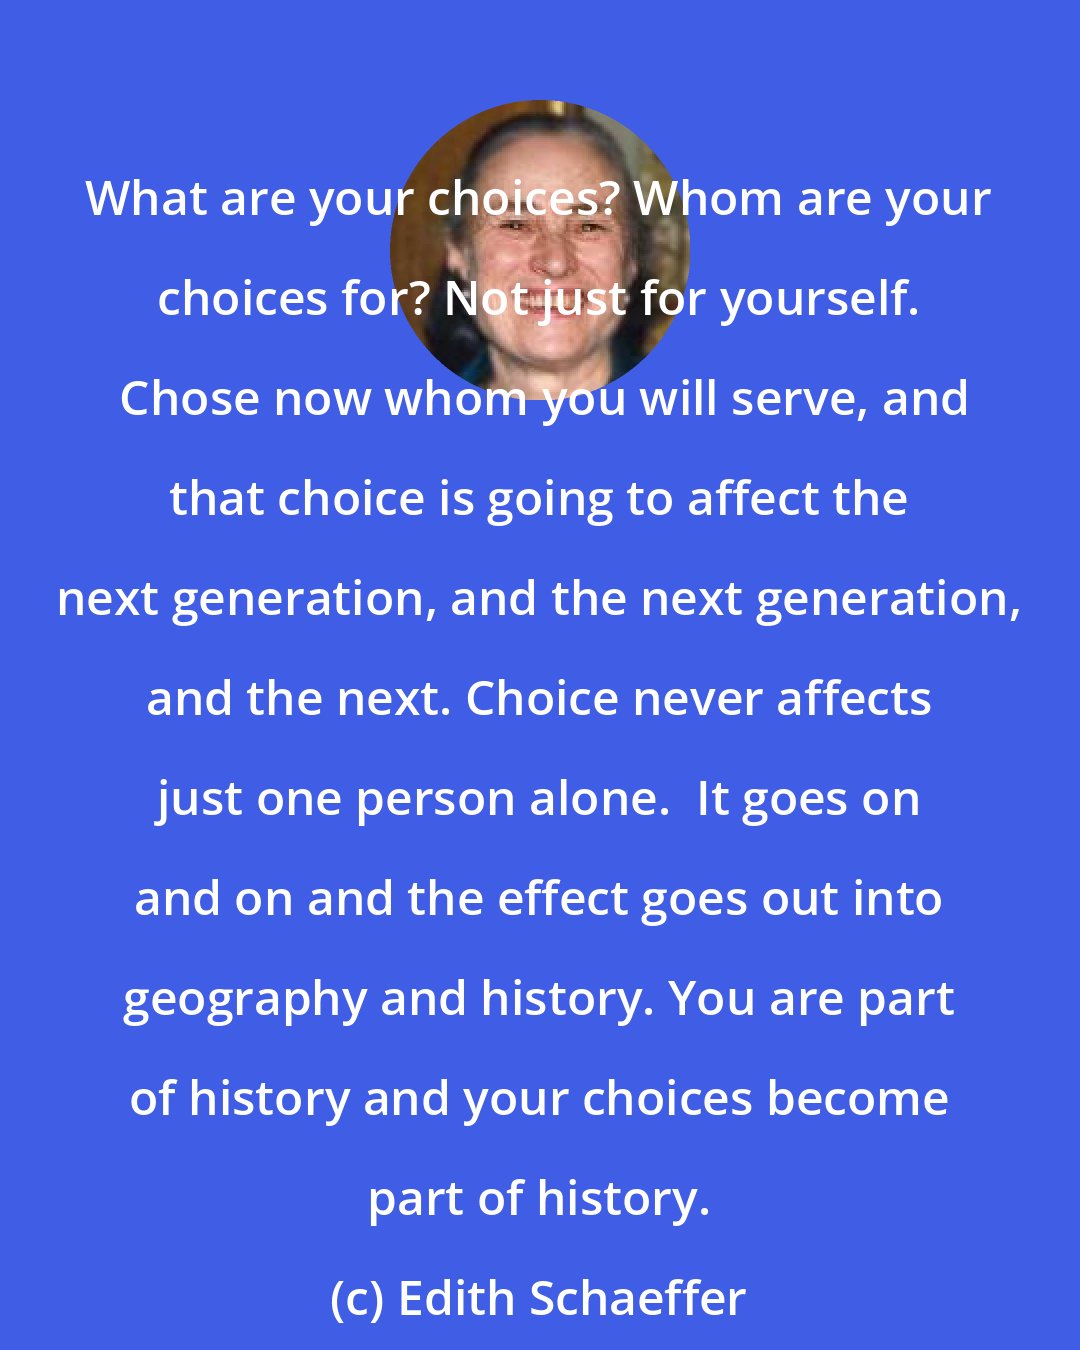 Edith Schaeffer: What are your choices? Whom are your choices for? Not just for yourself.  Chose now whom you will serve, and that choice is going to affect the next generation, and the next generation, and the next. Choice never affects just one person alone.  It goes on and on and the effect goes out into geography and history. You are part of history and your choices become part of history.